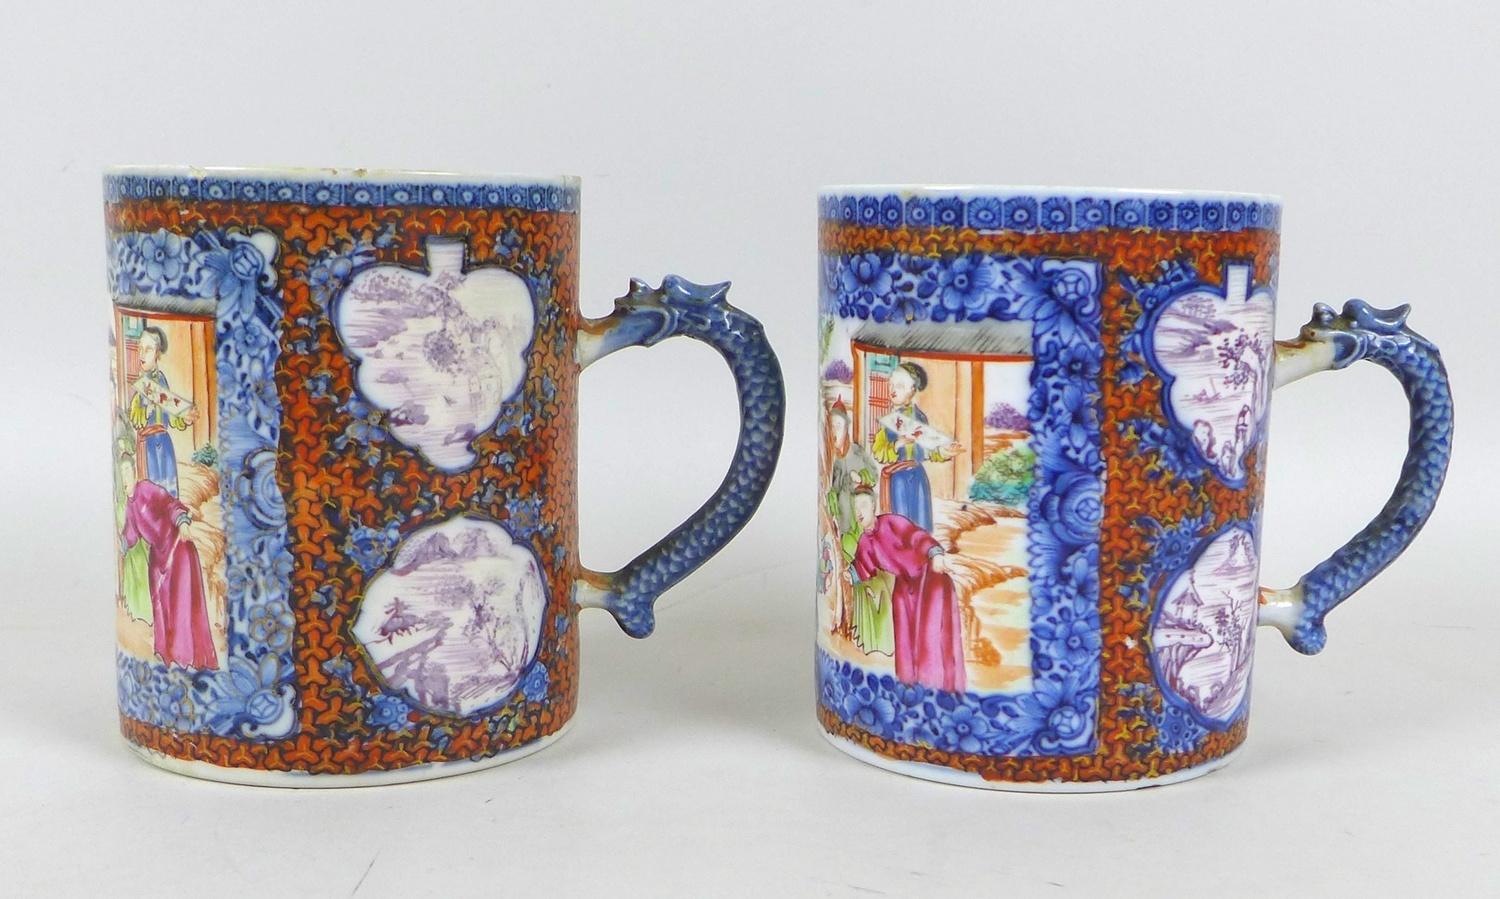 A pair of Chinese Export porcelain tankards, Qing Dynasty, early 19th century, decorated in